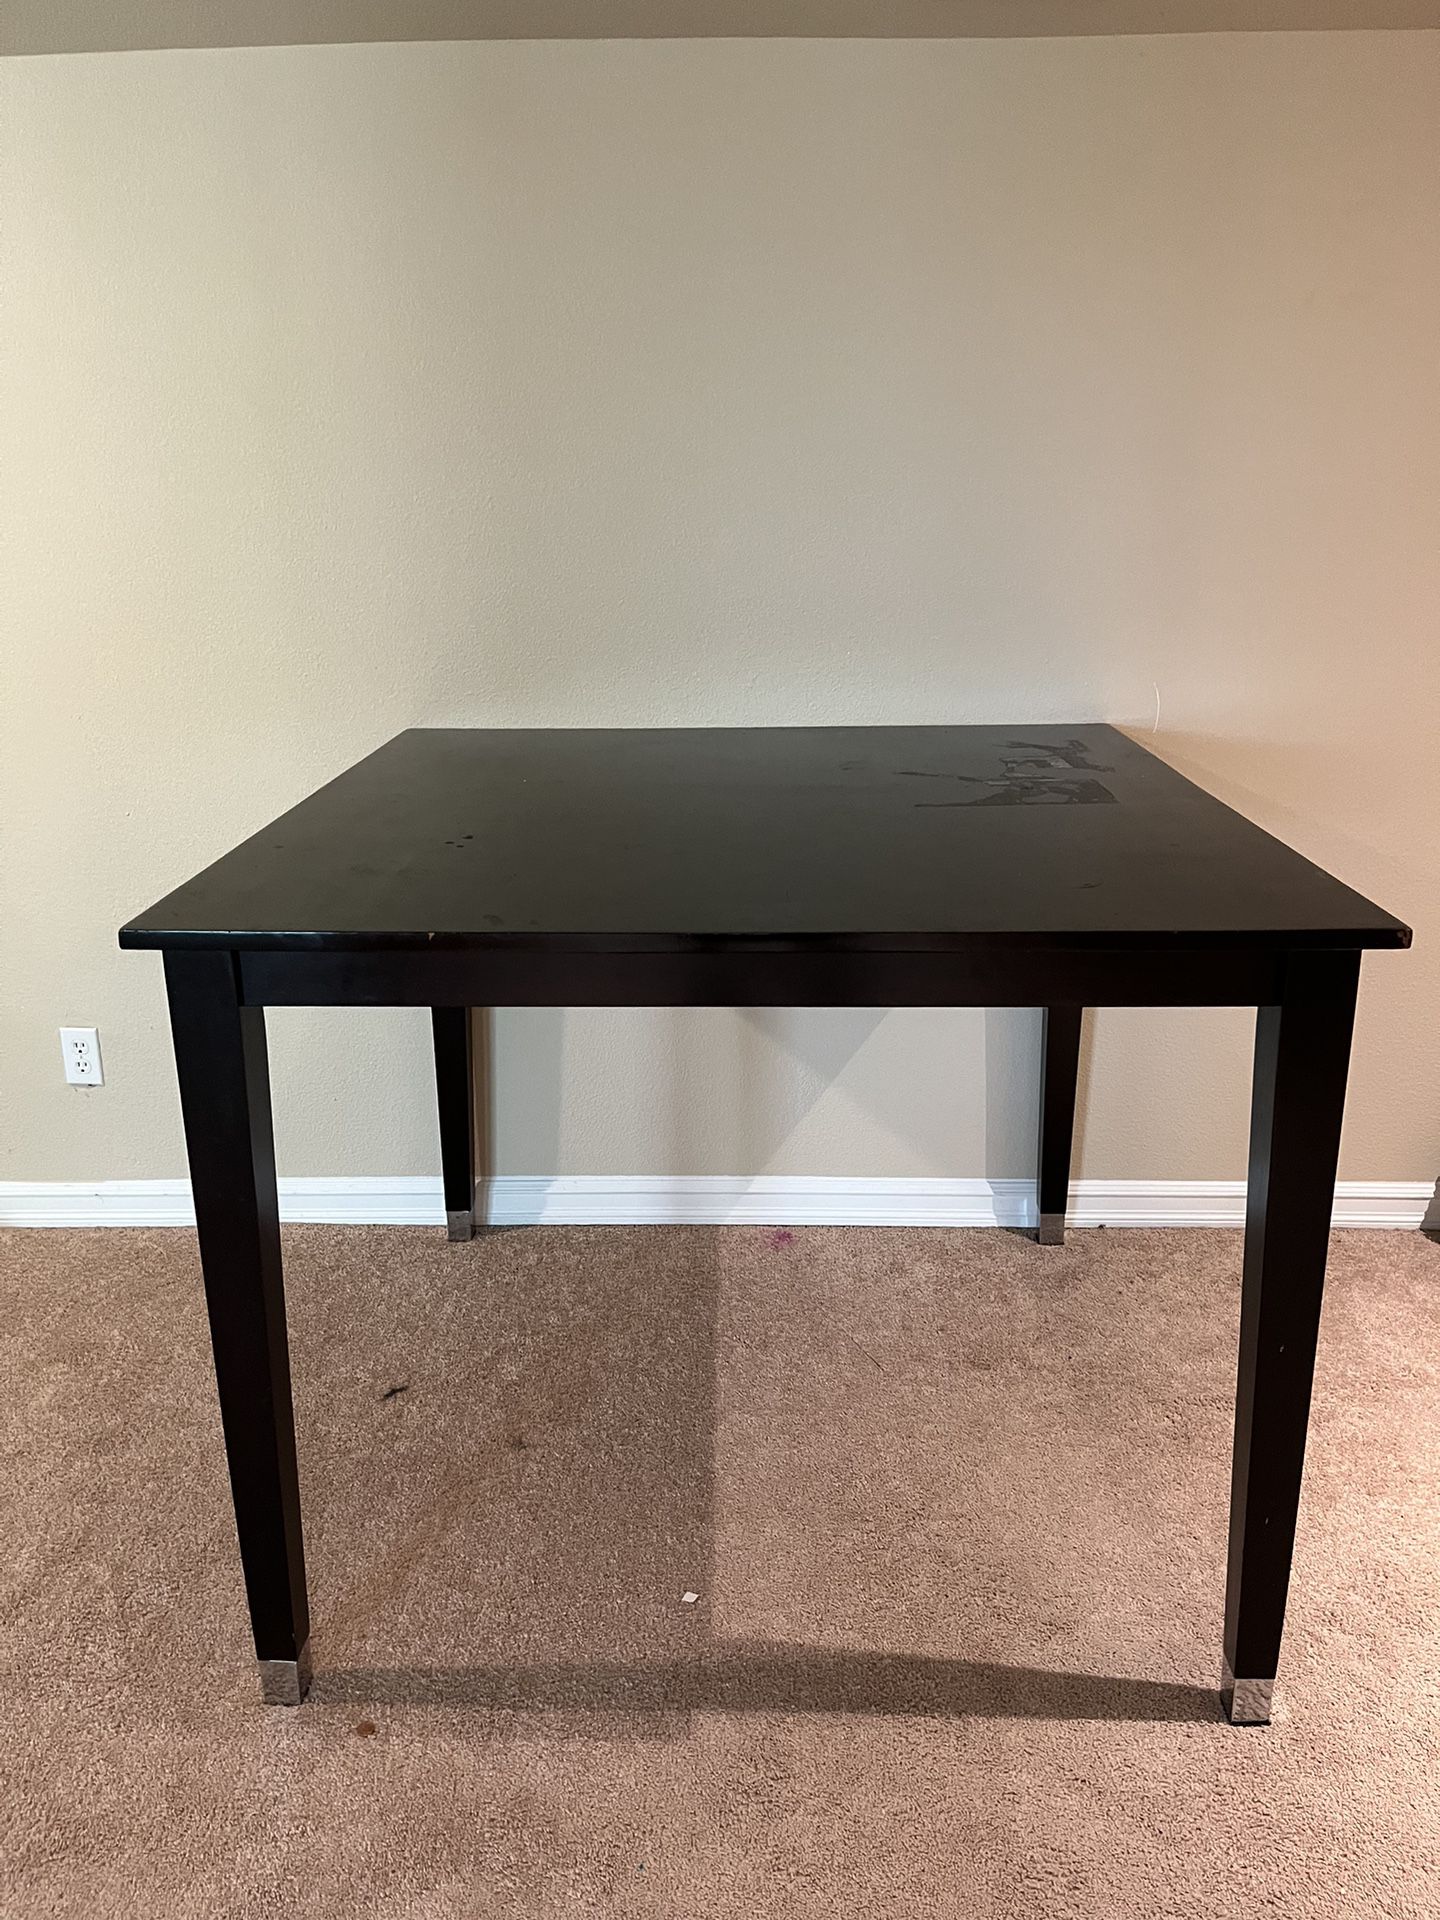 Large table - Good condition